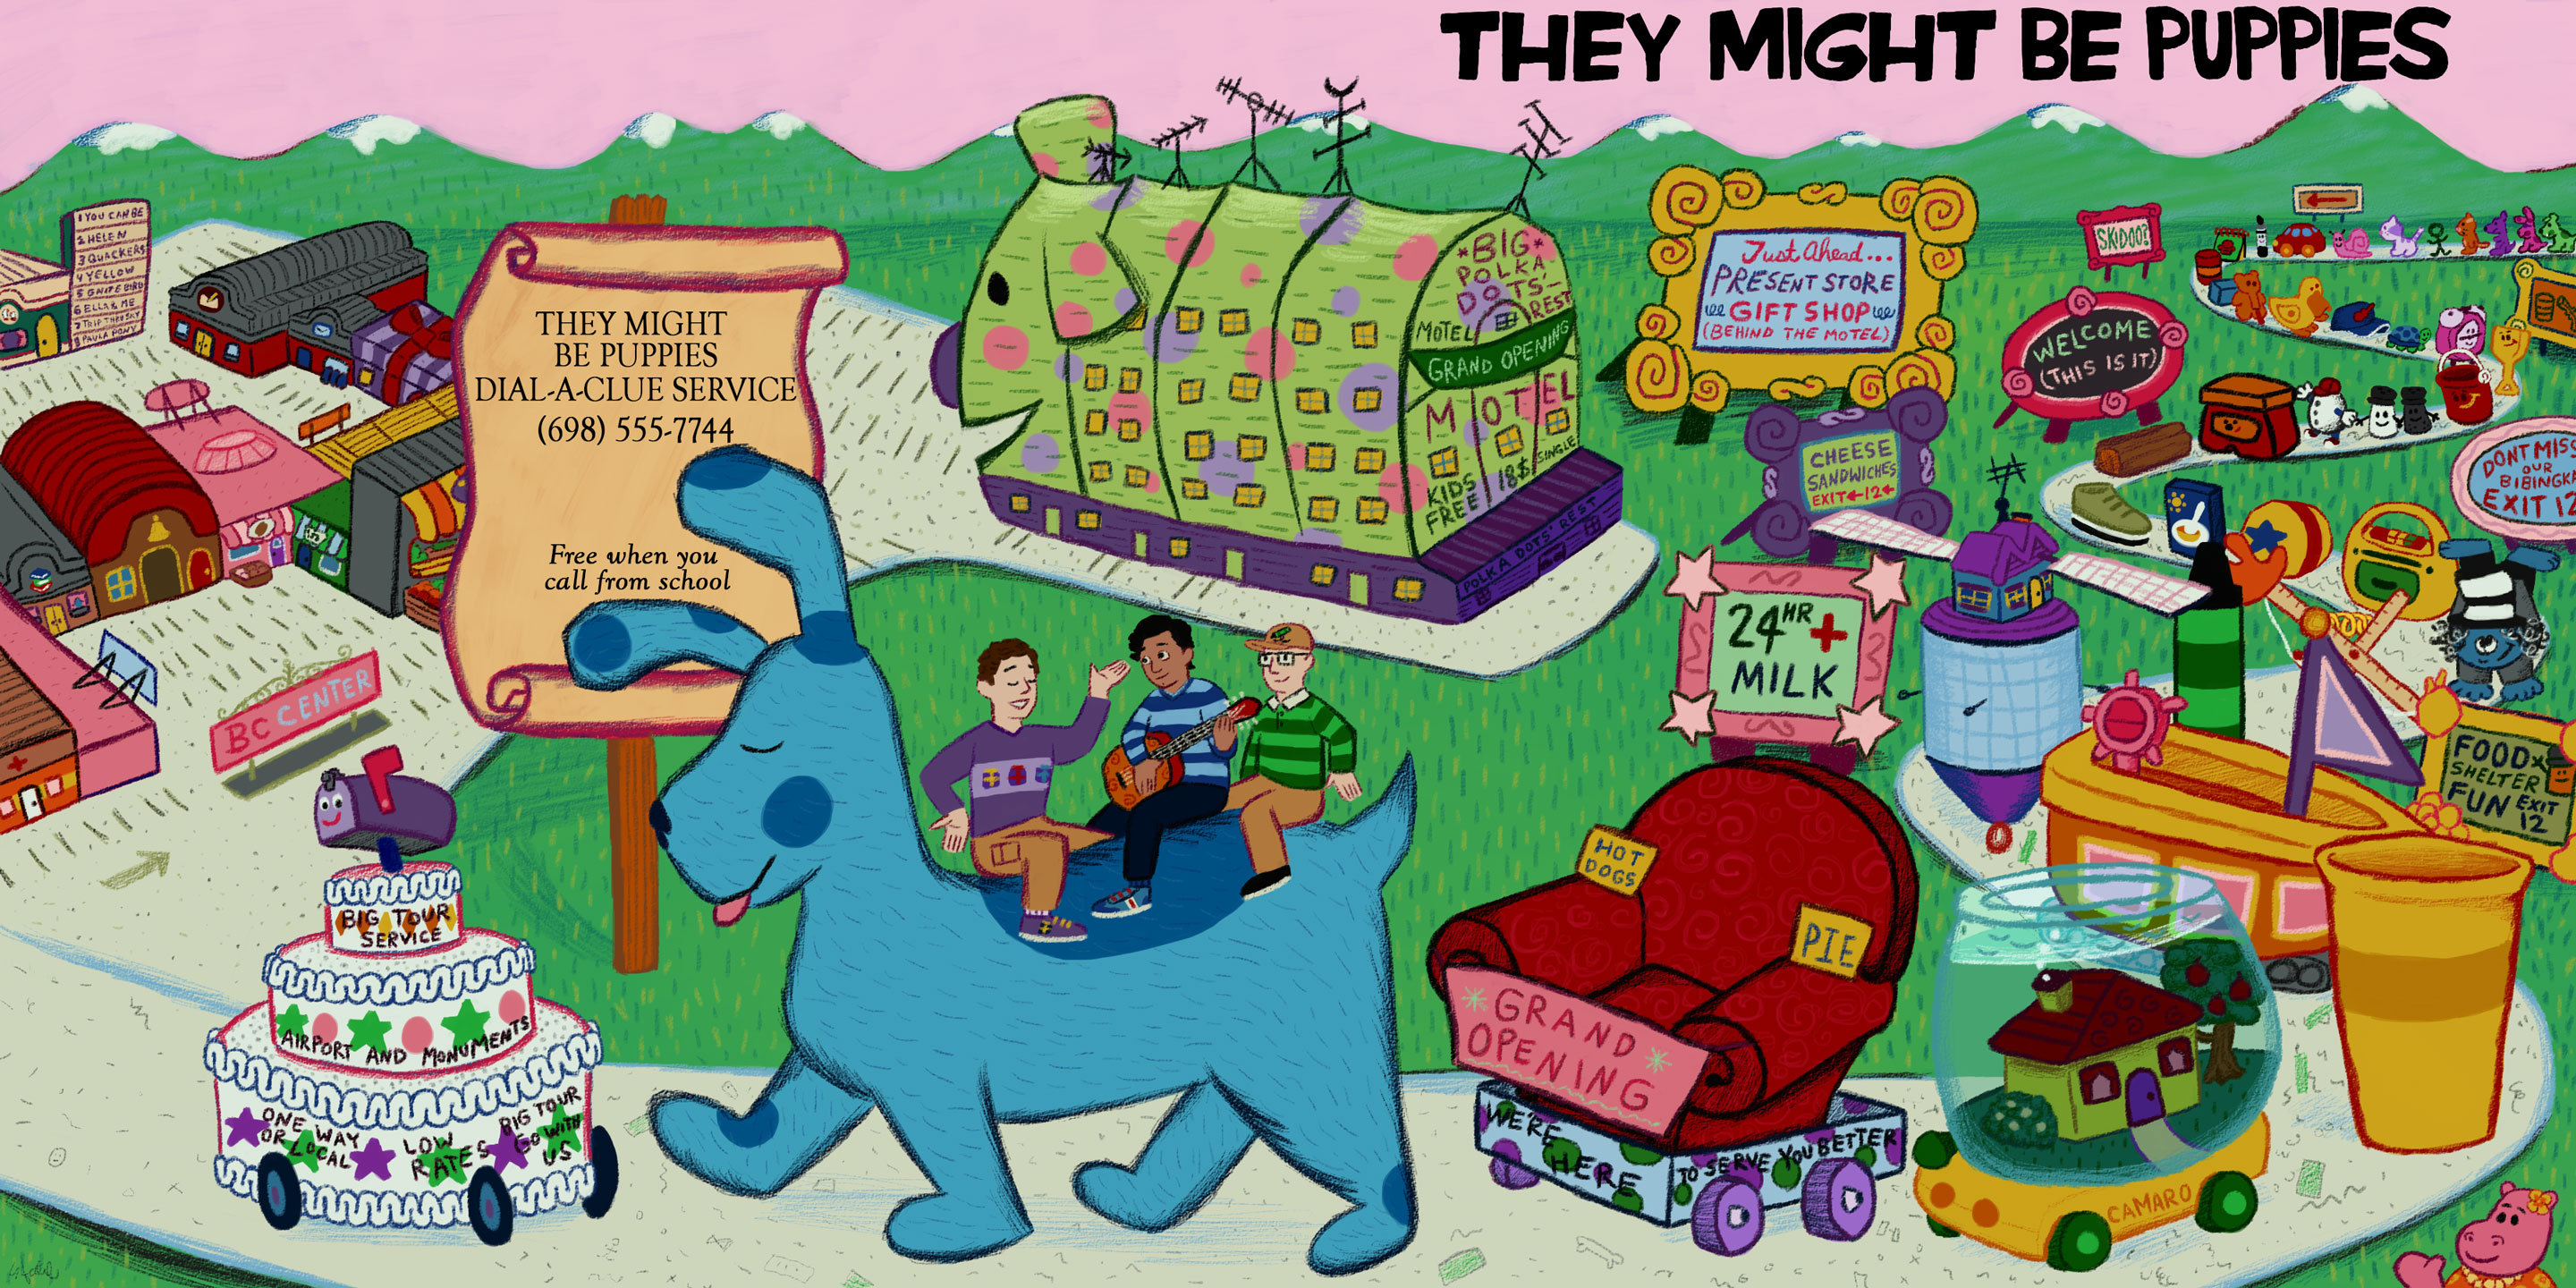 The same digital drawing, but the track listing in the sky is gone and the text on the signpost is different. Instead of credits, it says 'THEY MIGHT BE PUPPIES DIAL-A-CLUE SERVICE 698-555-7744. Free when you call from school.'